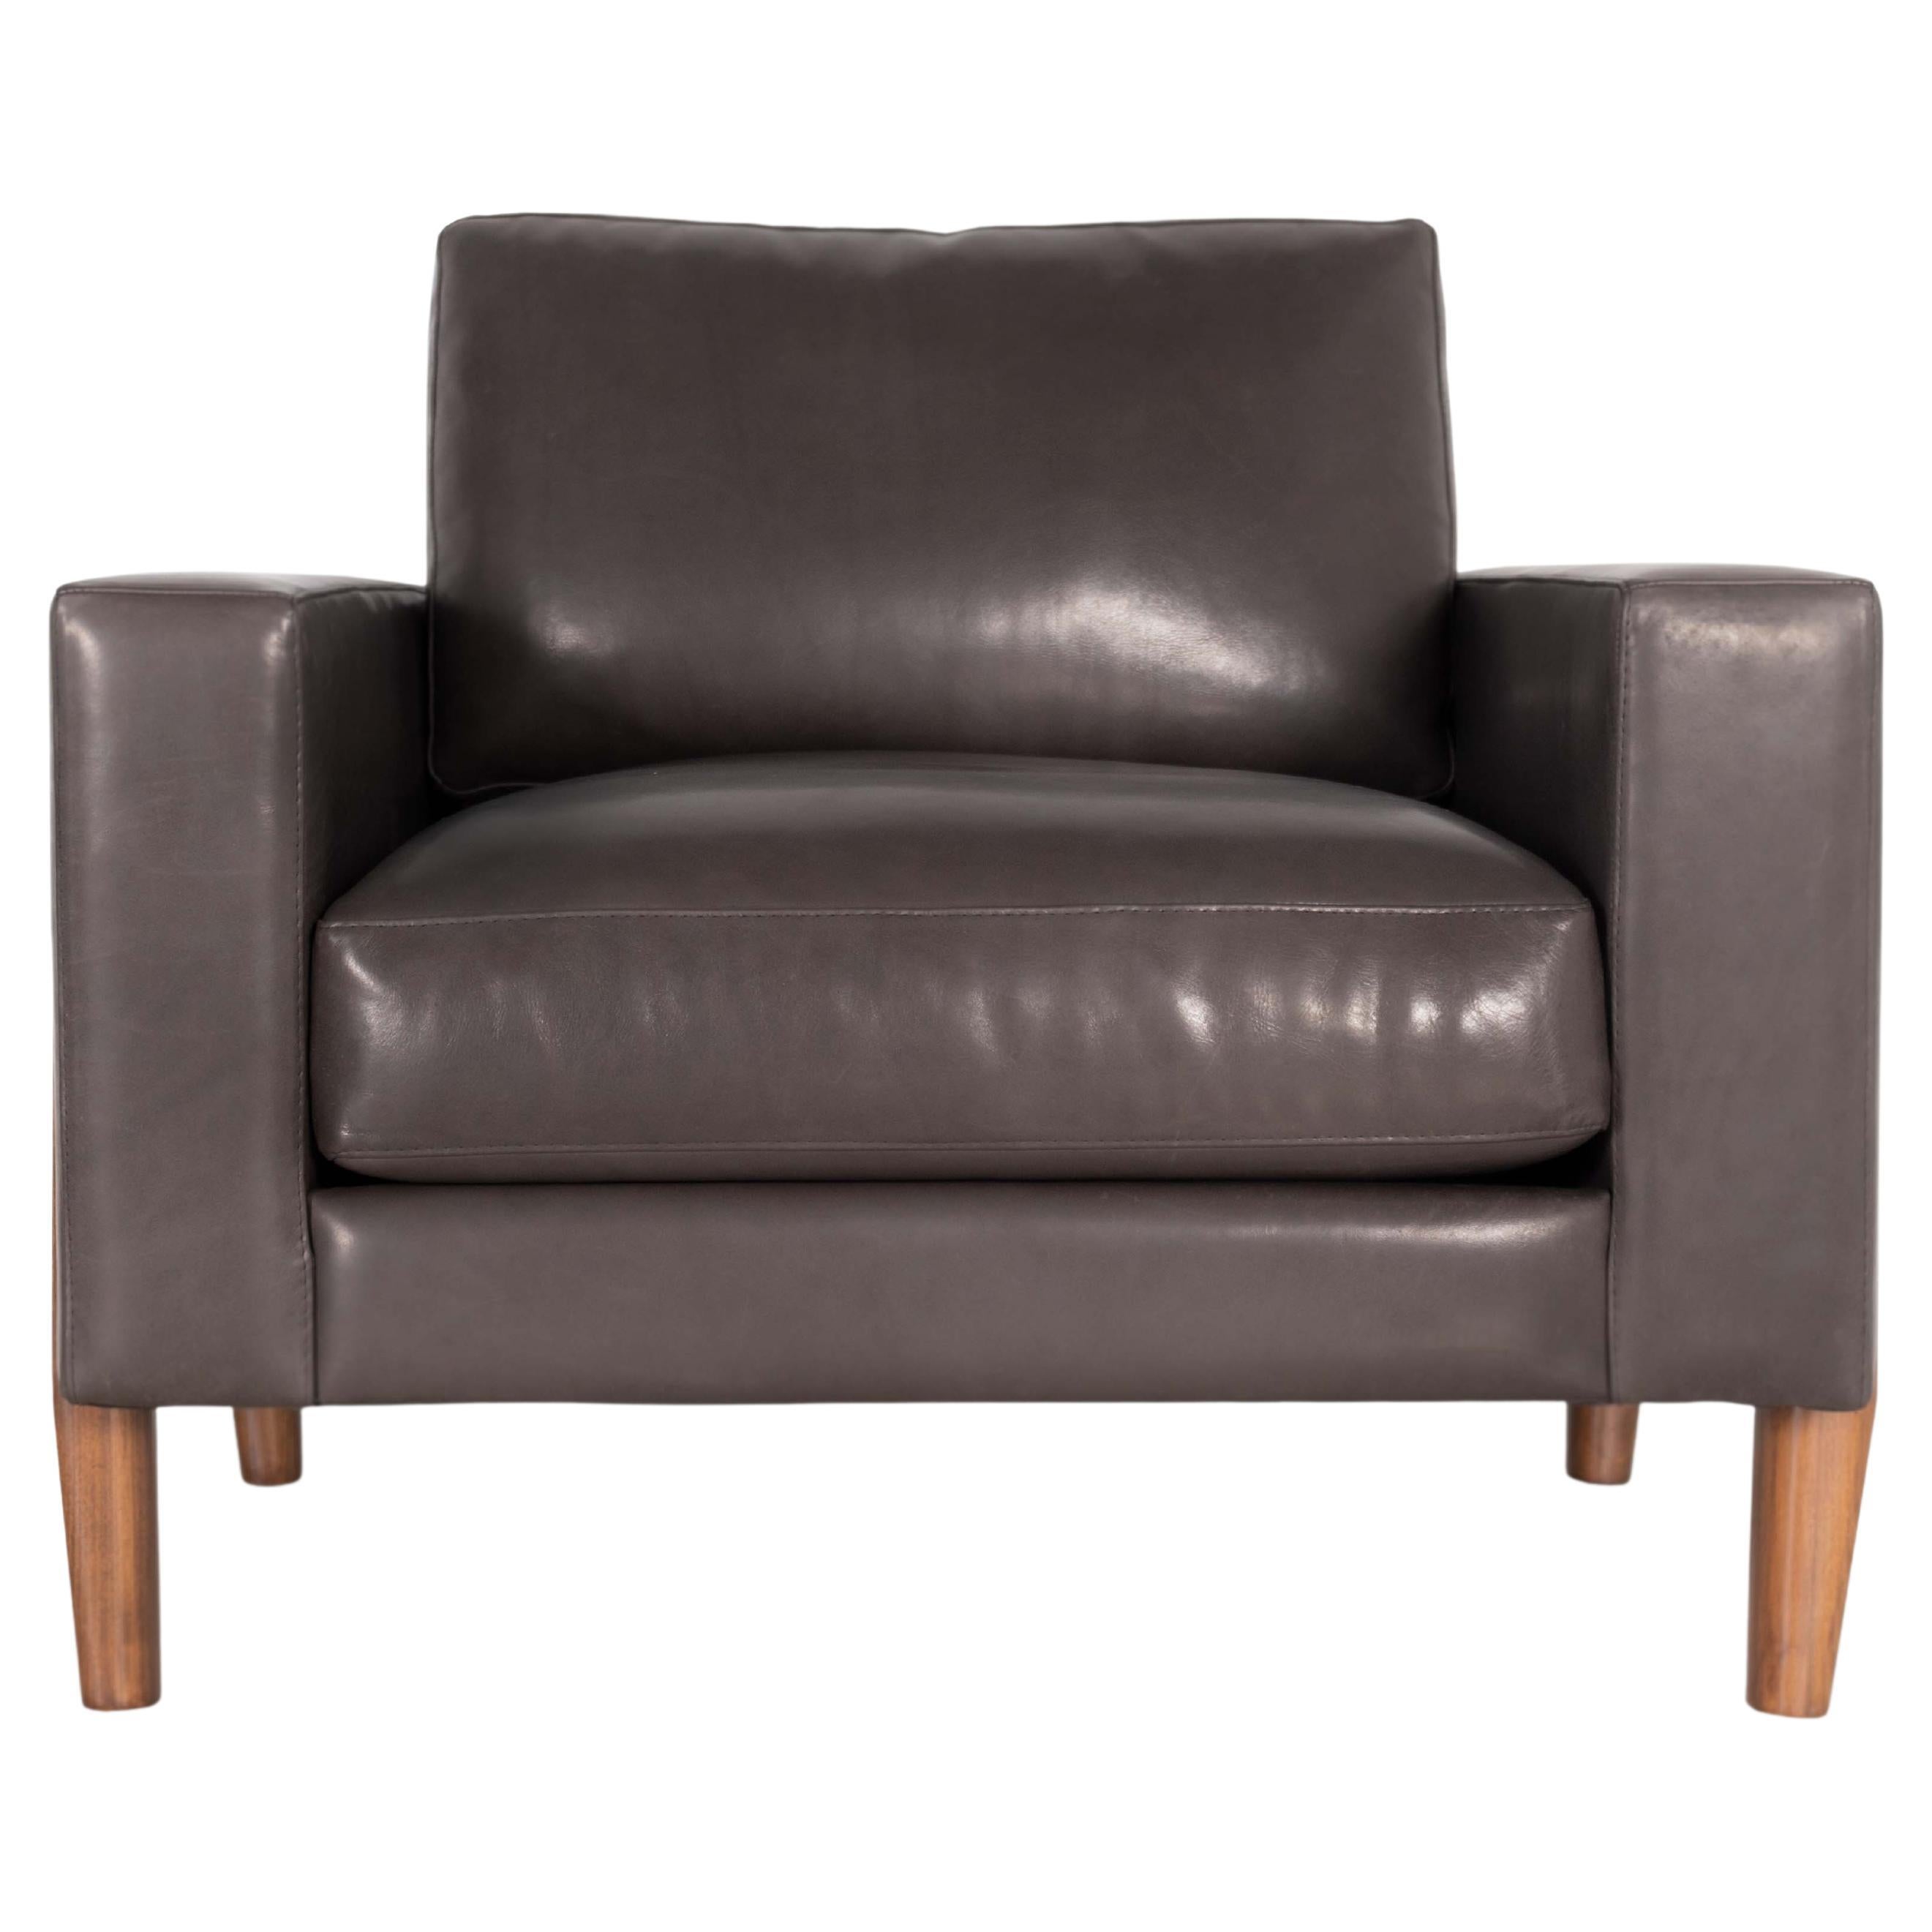 Frameworks Alpine Leather Chair with Frameworks Russet Wooden Legs